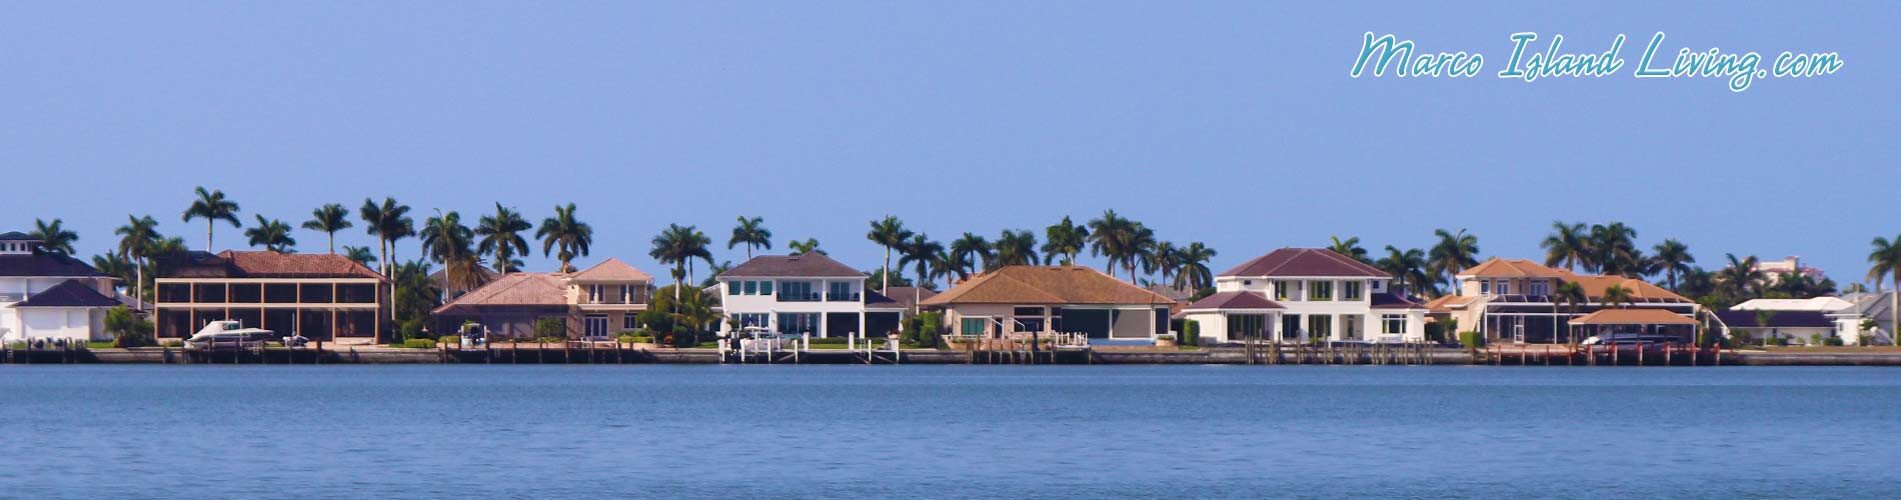 Marco Island Florida Homes Real Estate Attractions Fishing Dining